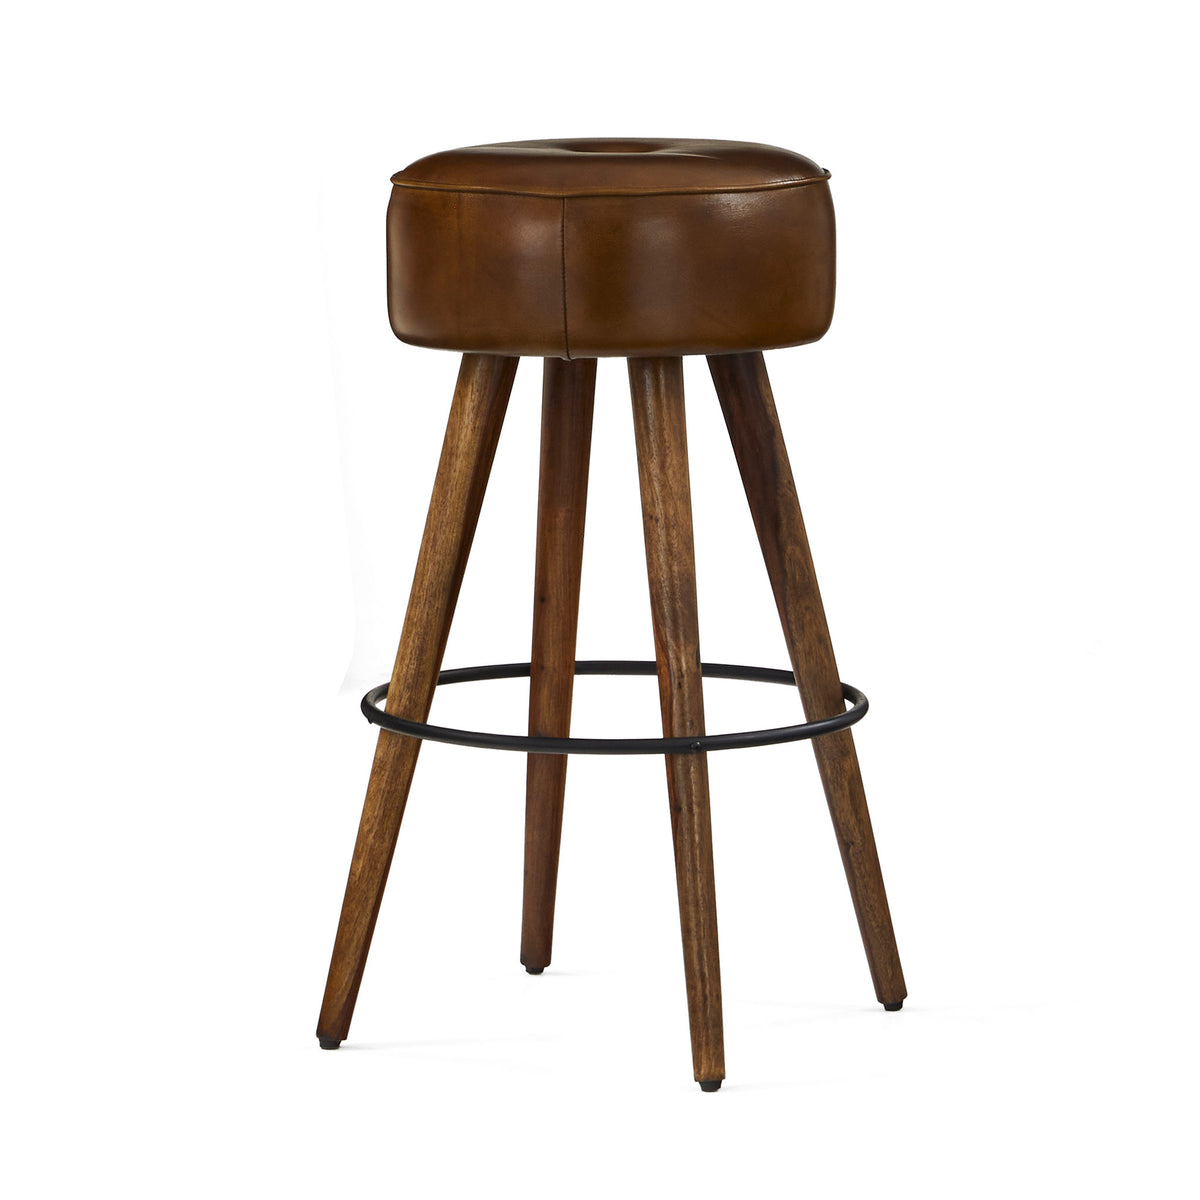 Loka Vintage Brown Leather Round Bar Stool from Roseland Furniture